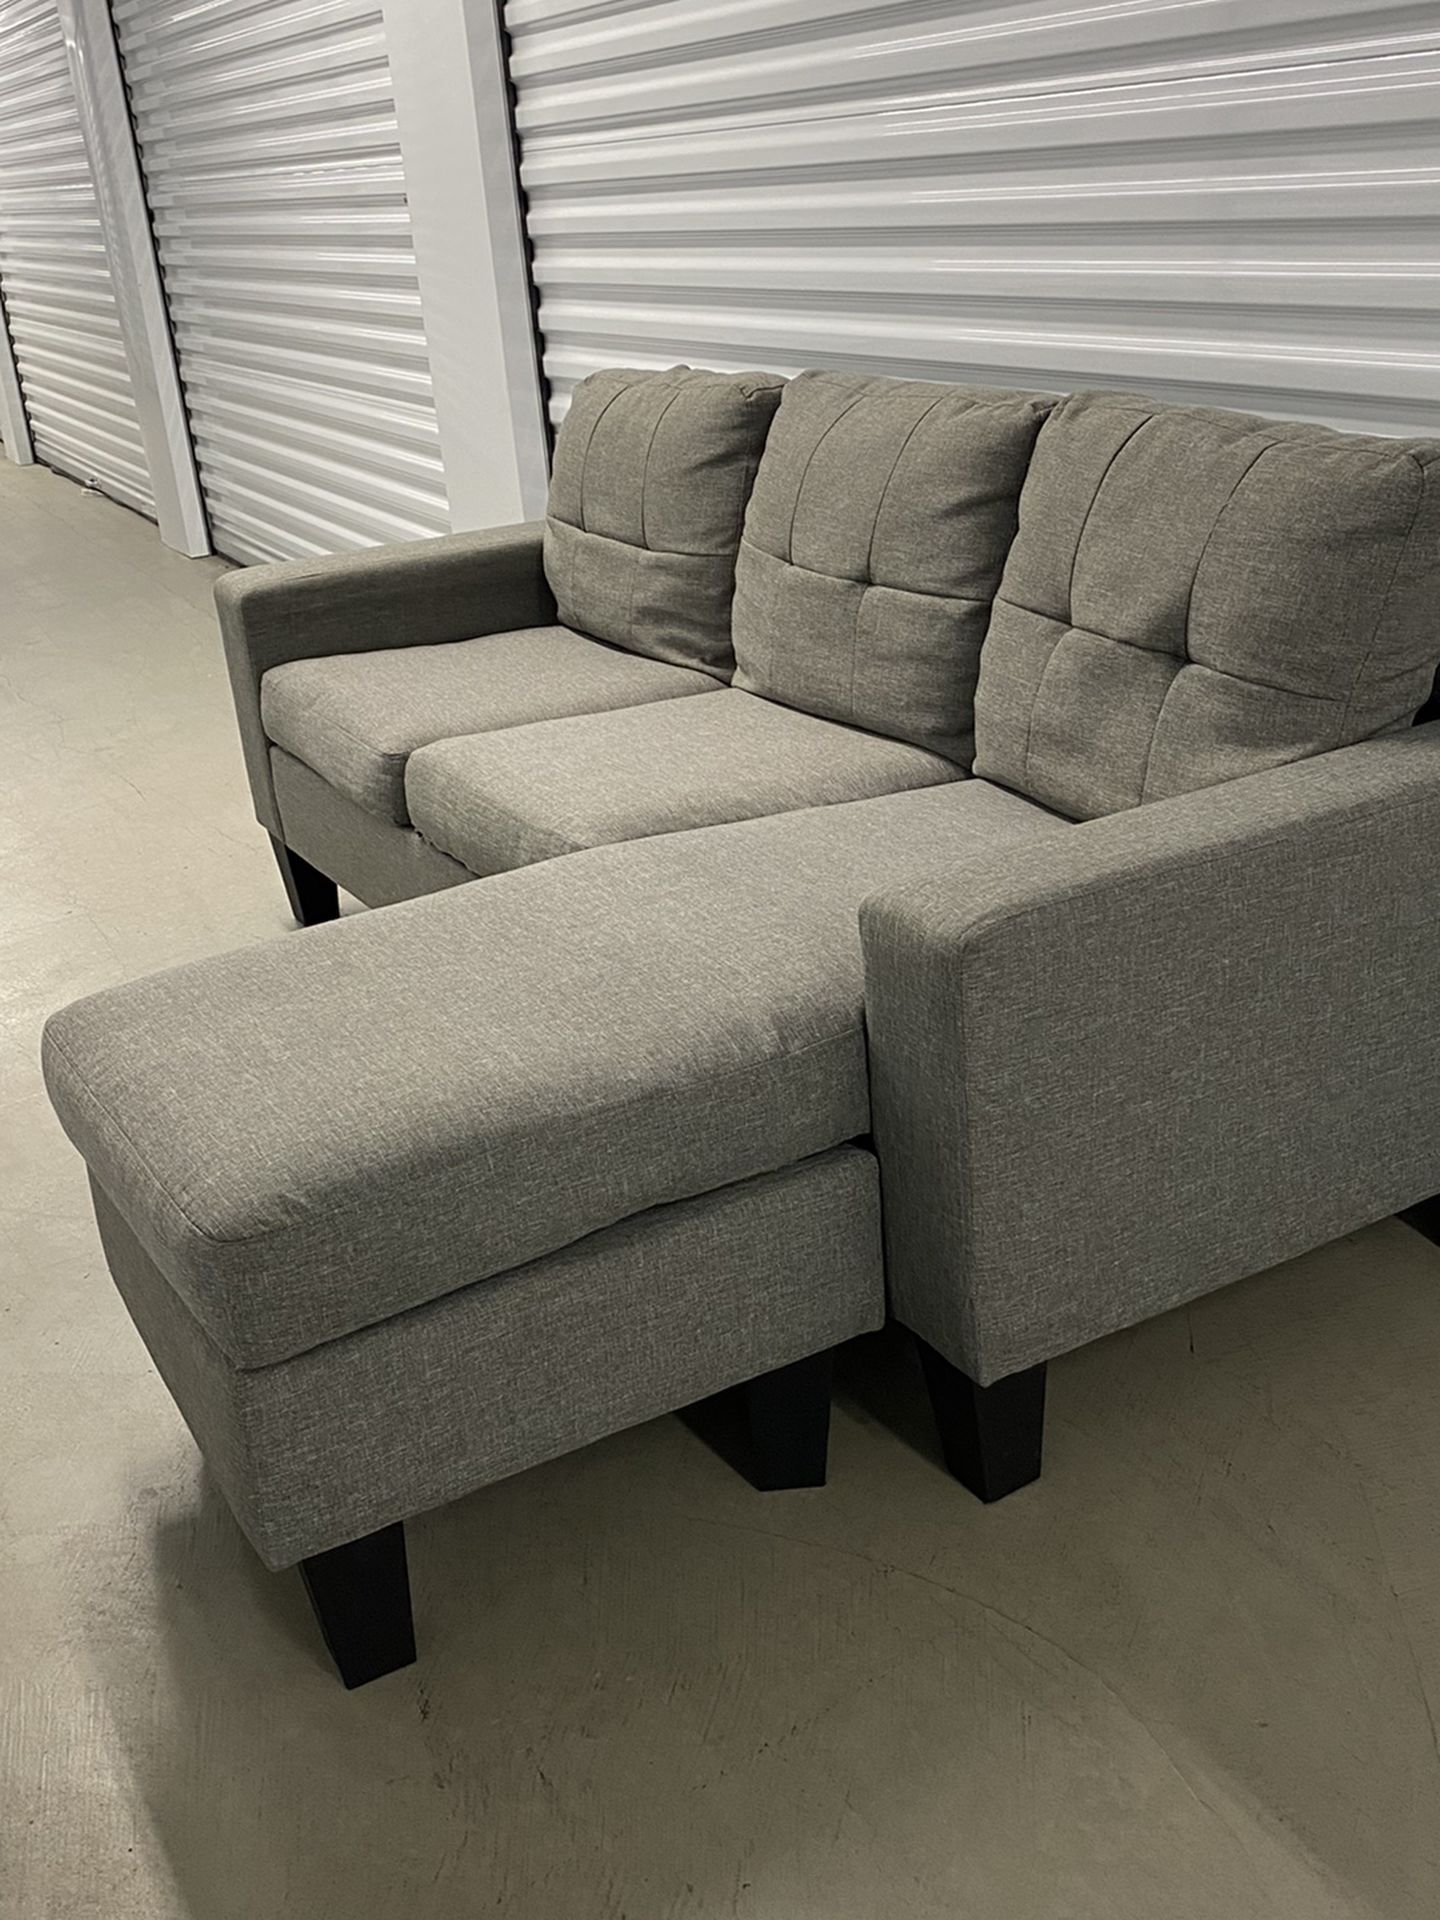 Couch (Free Delivery)